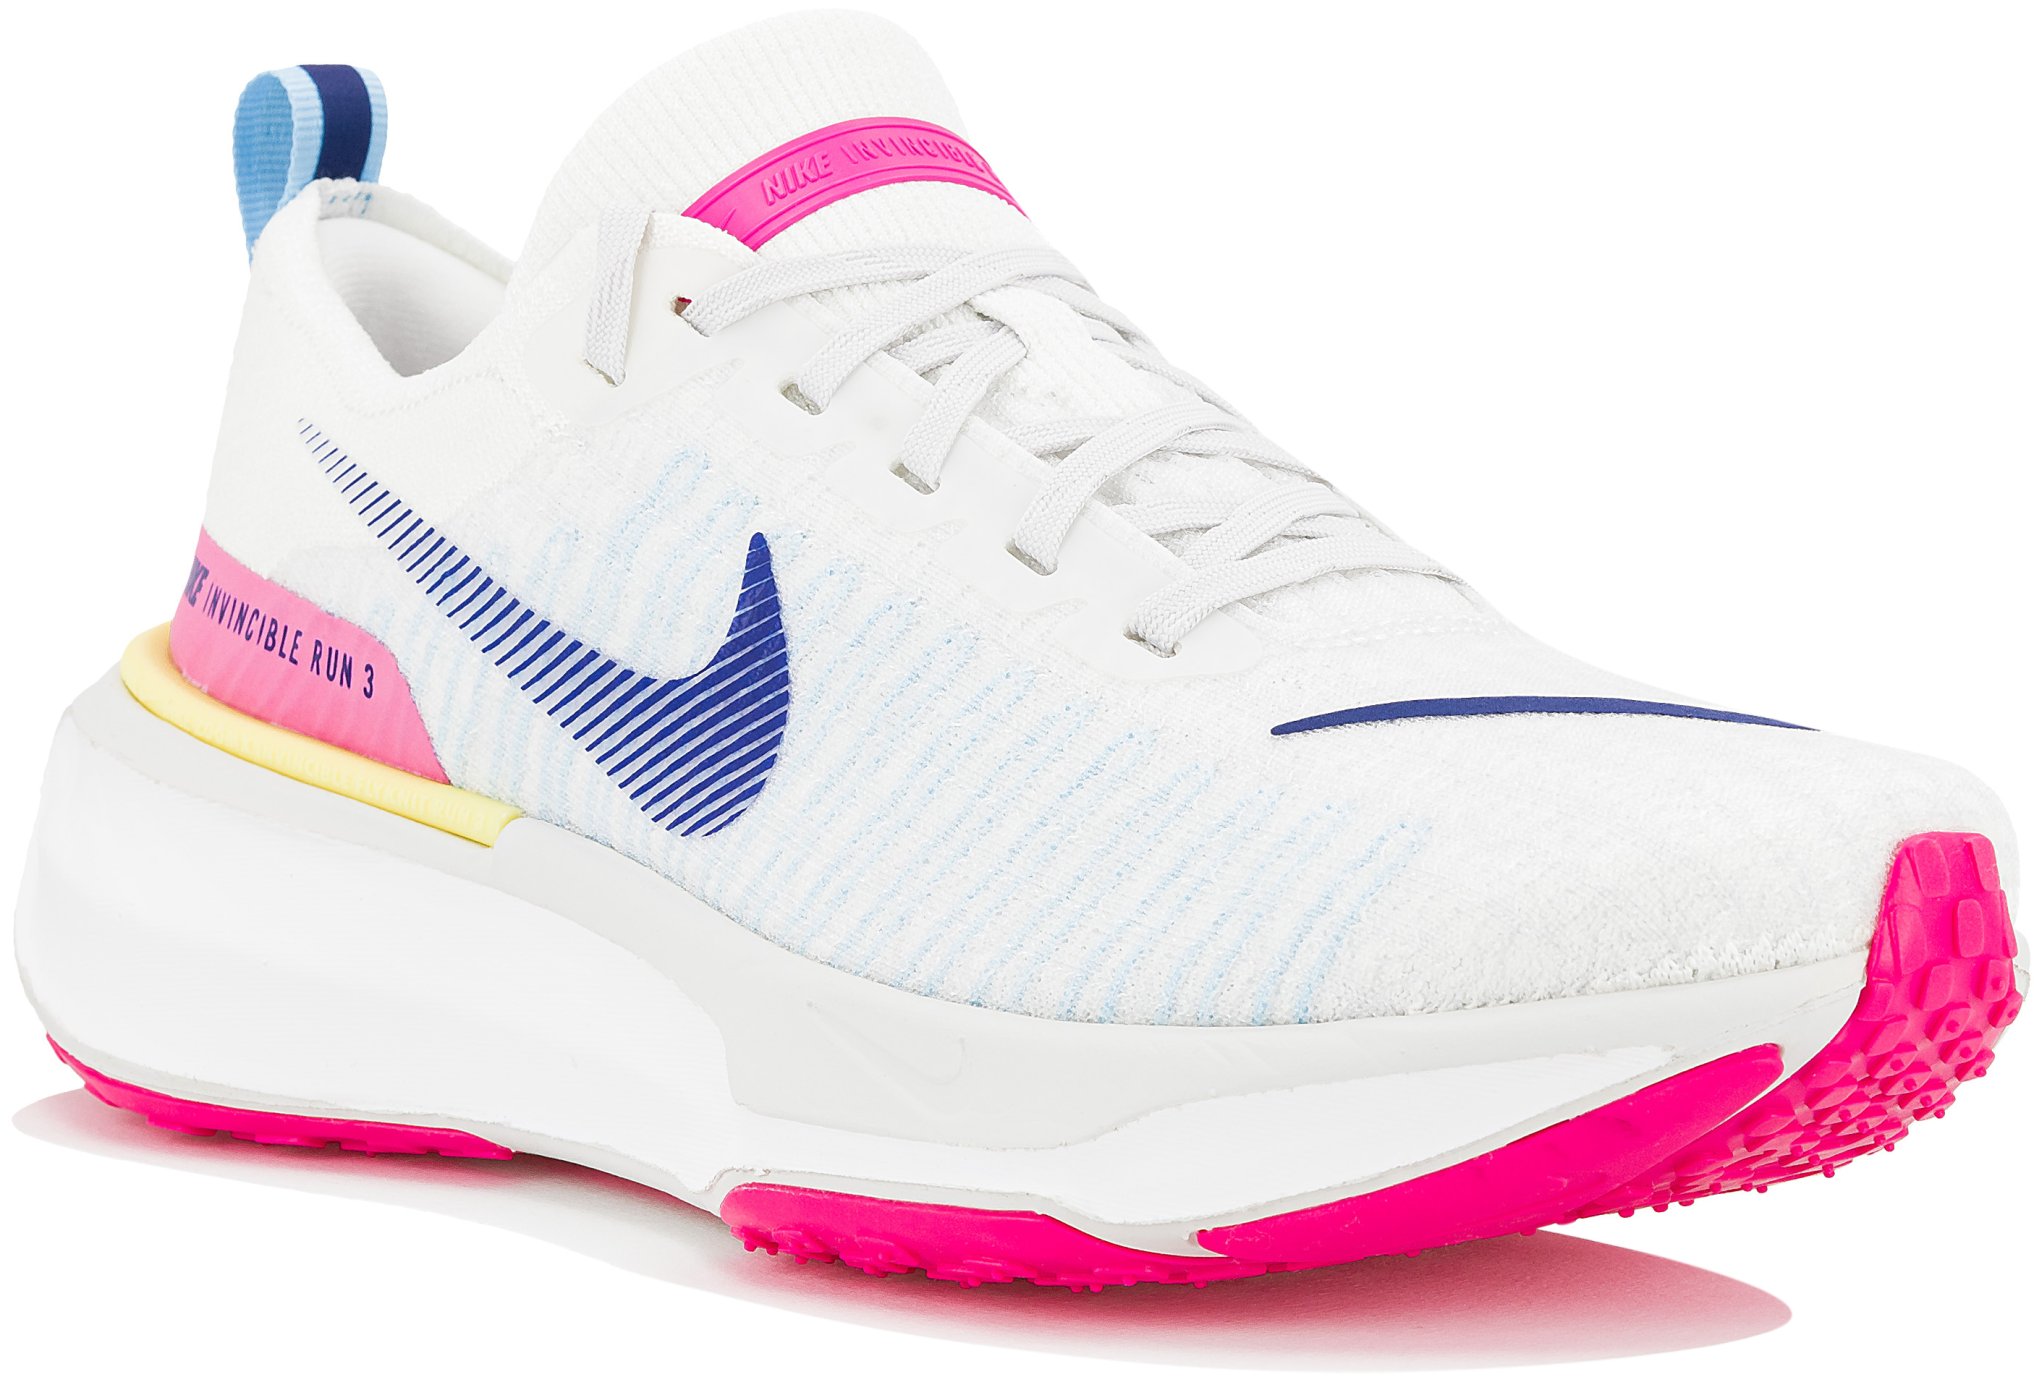 Nike Invincible 3 W Chaussures running femme